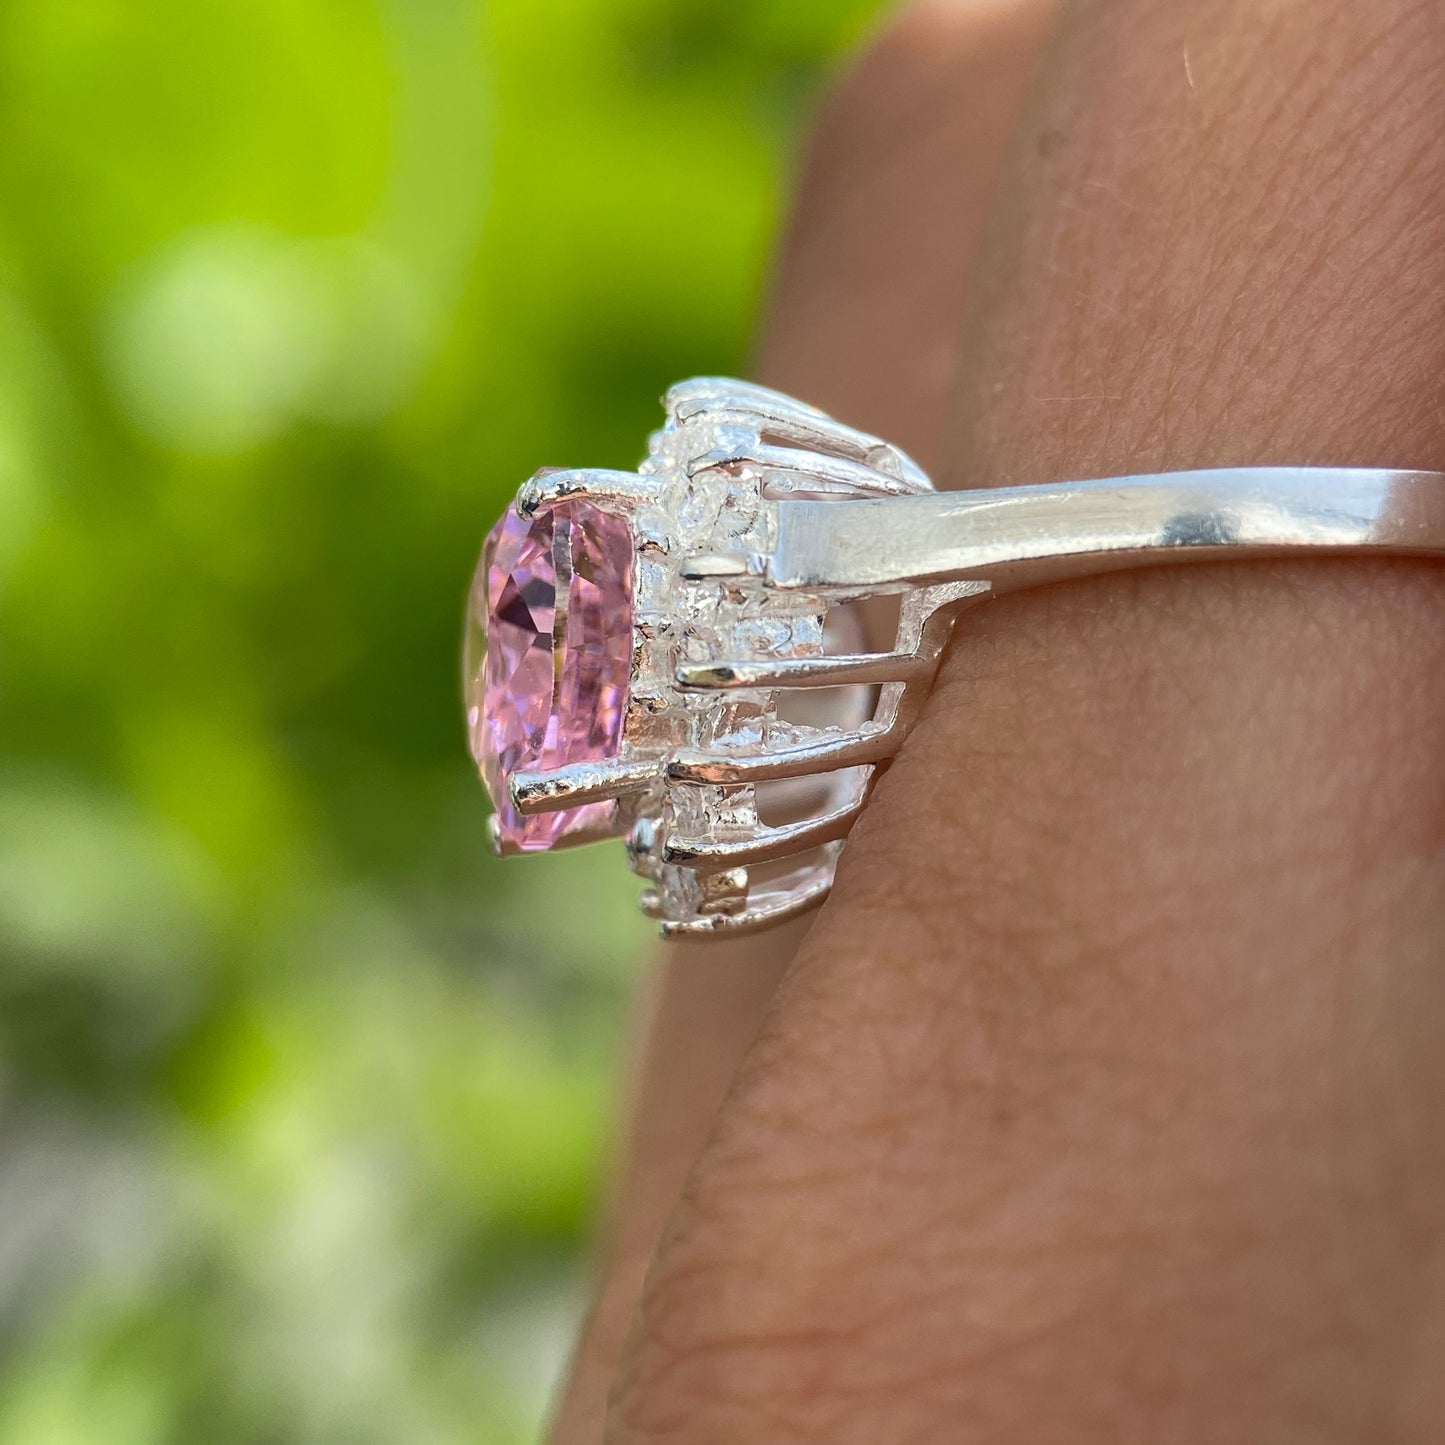 Serena Ring in Silver with Pink Zirconia Inspired by Sailor M.